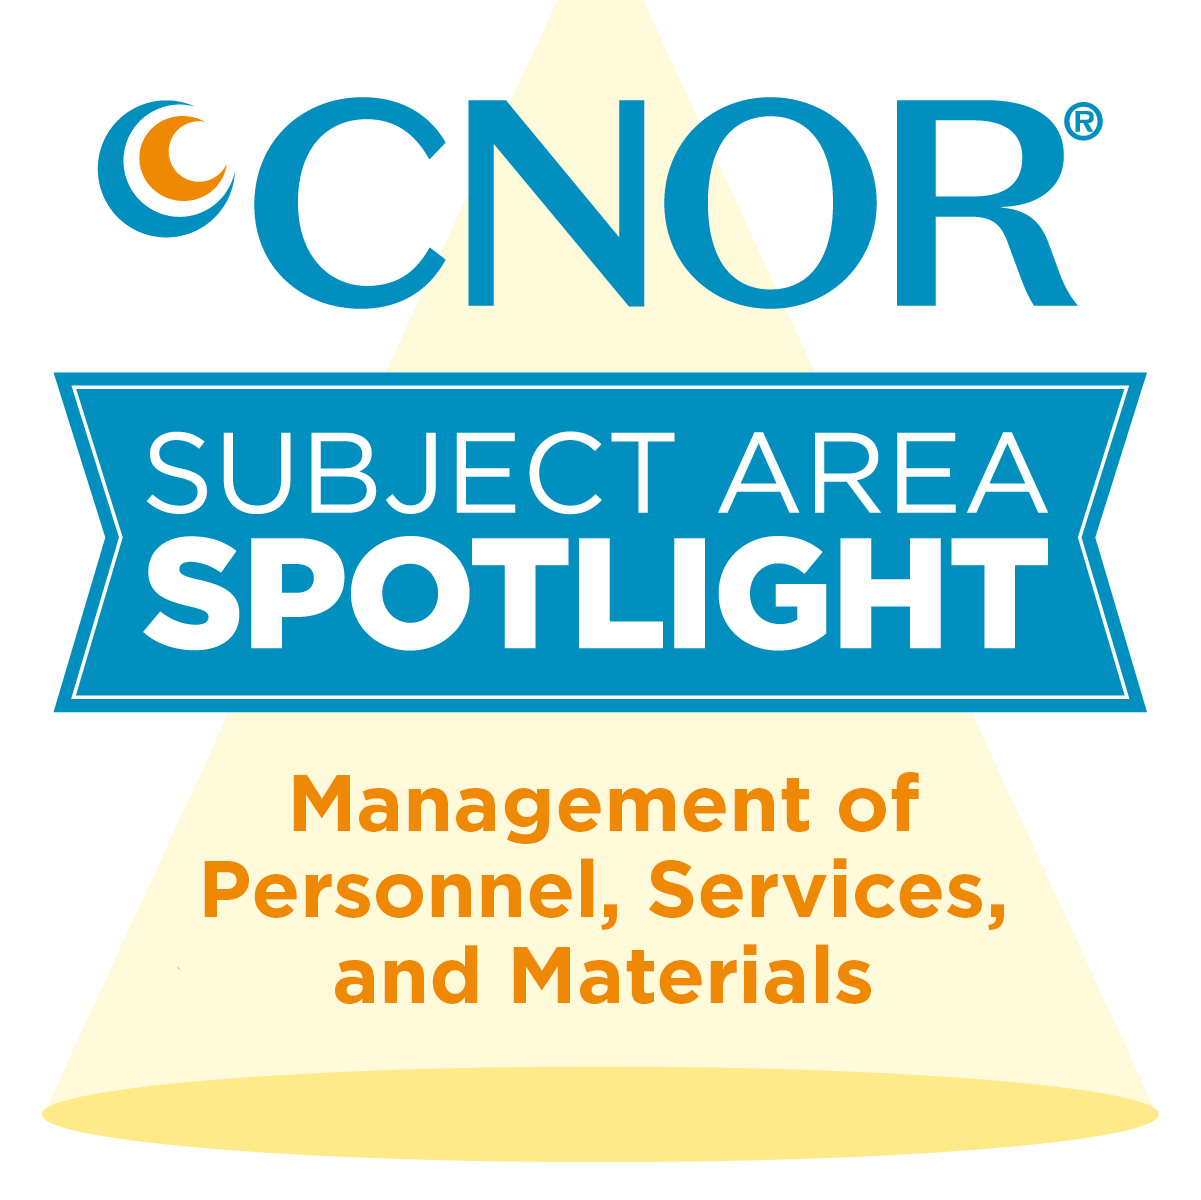 CNOR Subject Area Spotlight: Intraoperative Management of Personnel, Services, and Materials